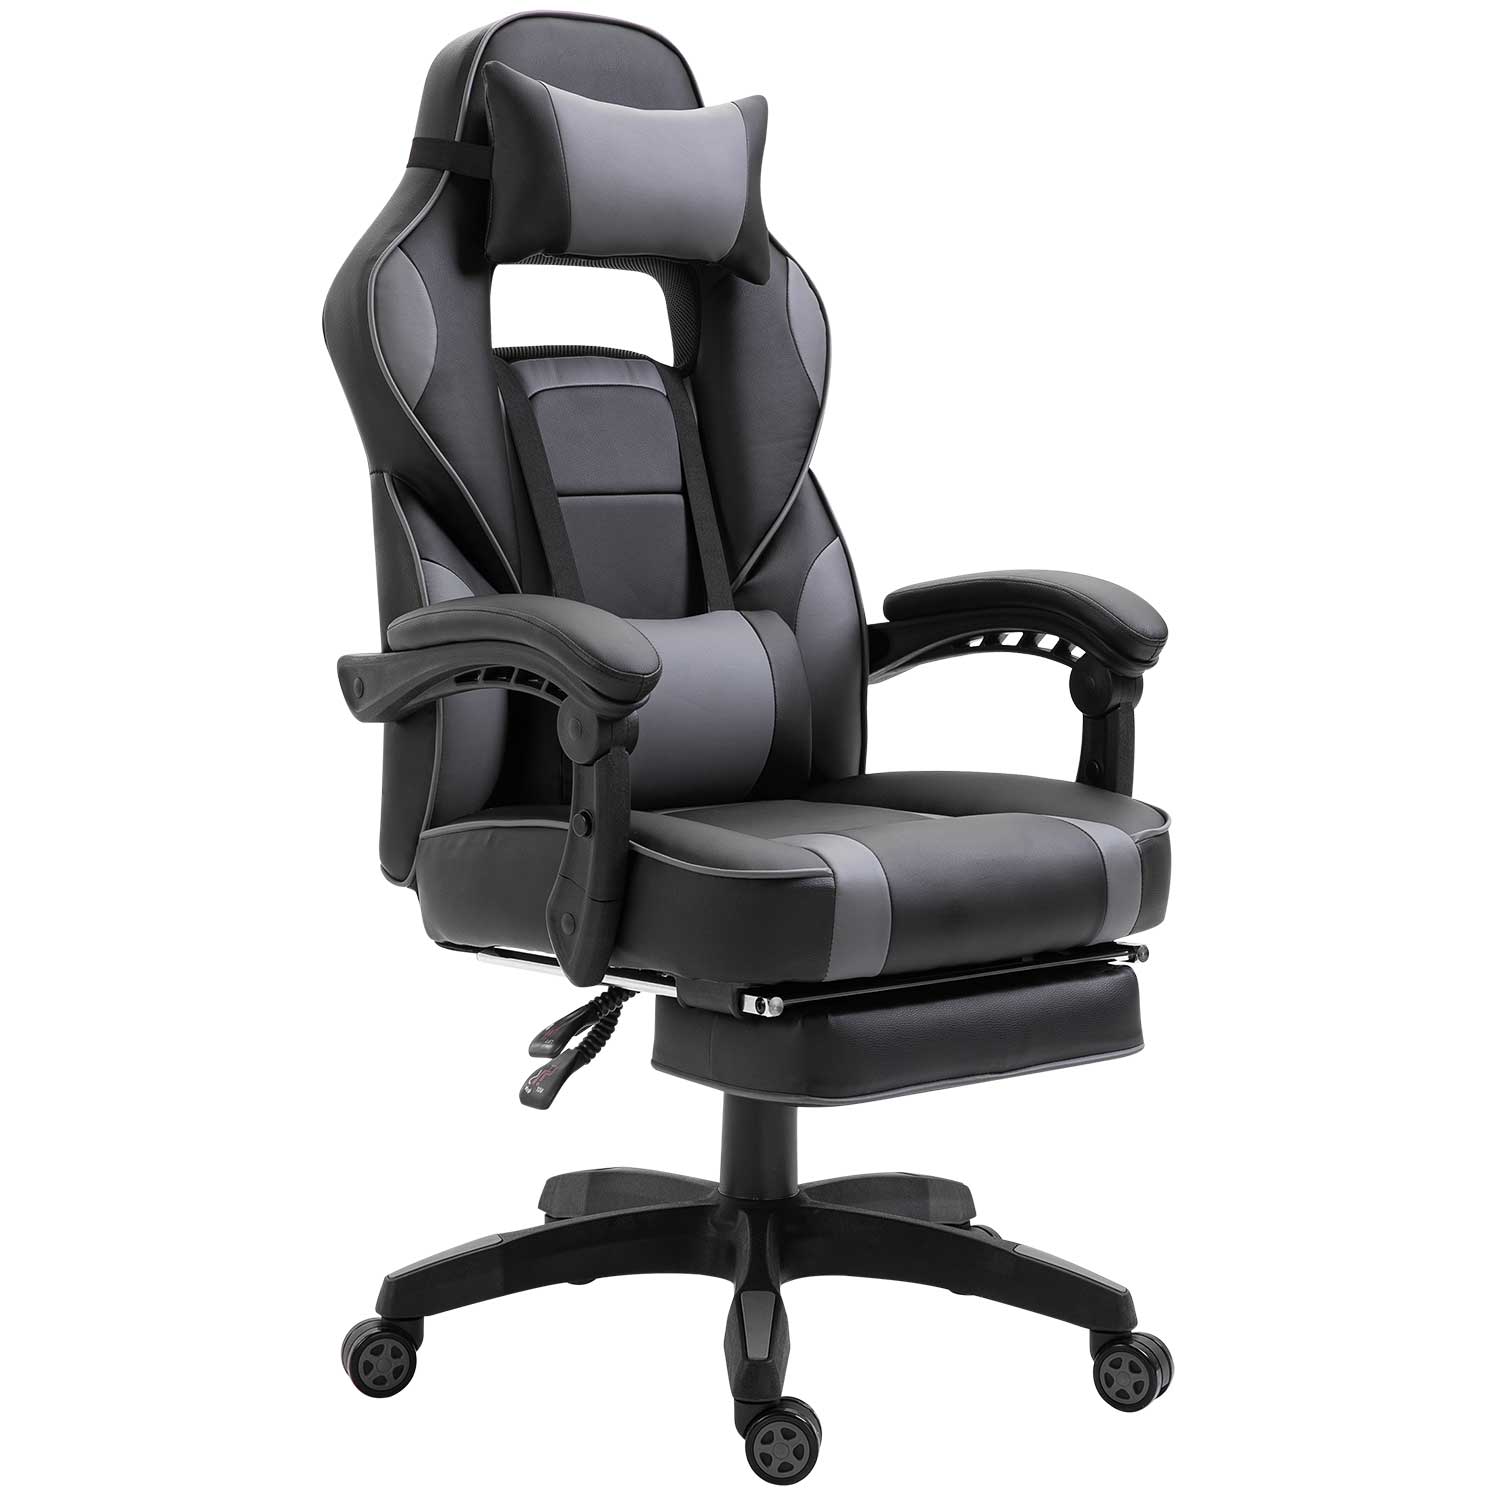 E-Gaming - Gaming Chair Office Chair - green- pillow & footrest included